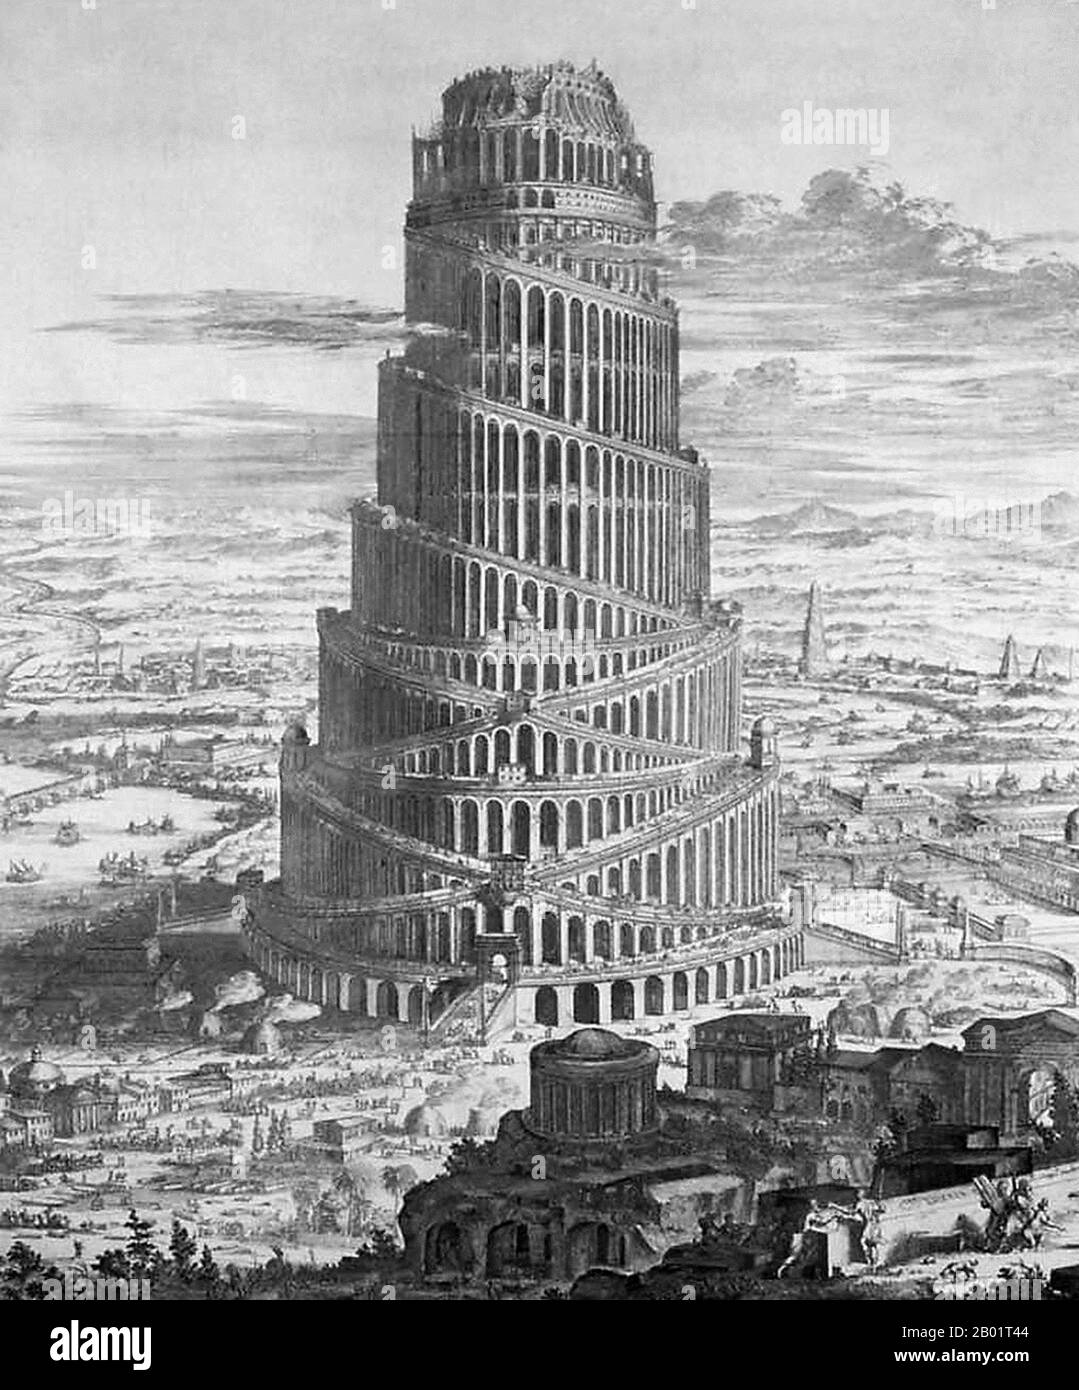 Netherlands/Iraq/Mesopotamia: 'The Building of the Tower of Babel'. Engraving by Coenraet Decker (1650-1685) from 'Turris Babel' by Athanasius Kircher (1602-1680), 1679.  The Tower of Babel, according to the Book of Genesis, was an enormous tower built in the plain of Shinar.  According to the biblical account, a united humanity of the generations following the Great Flood, speaking a single language and migrating from the east, came to the land of Shinar, where they resolved to build a city with a tower 'with its top in the heavens...lest we be scattered abroad upon the face of the Earth'. Stock Photo